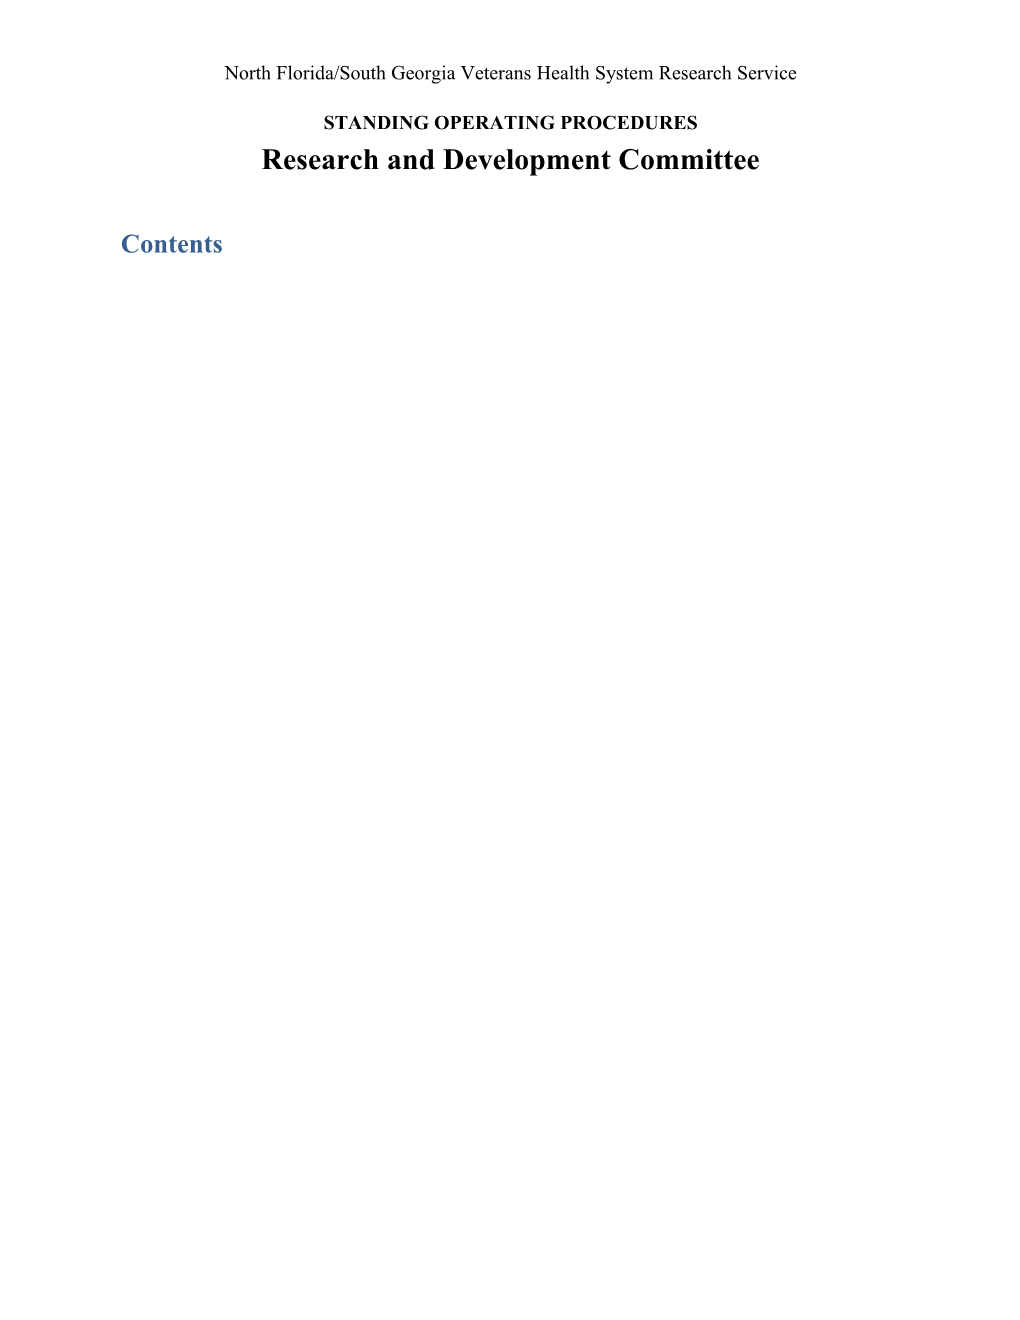 Research and Development Committee SOP 1